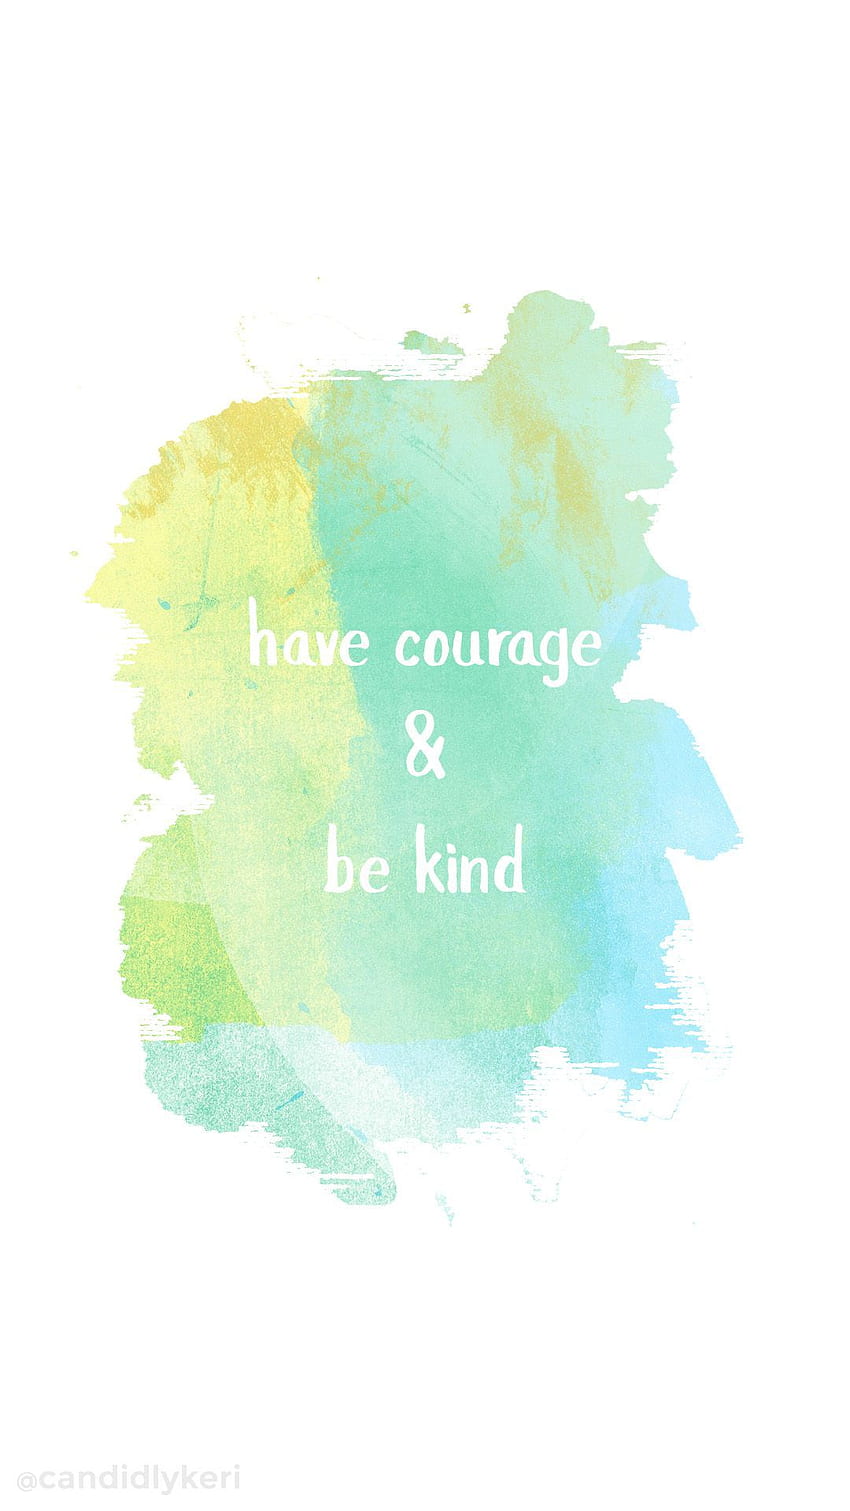 Have courage and be kind blue and yellow watercolor quote HD phone wallpaper